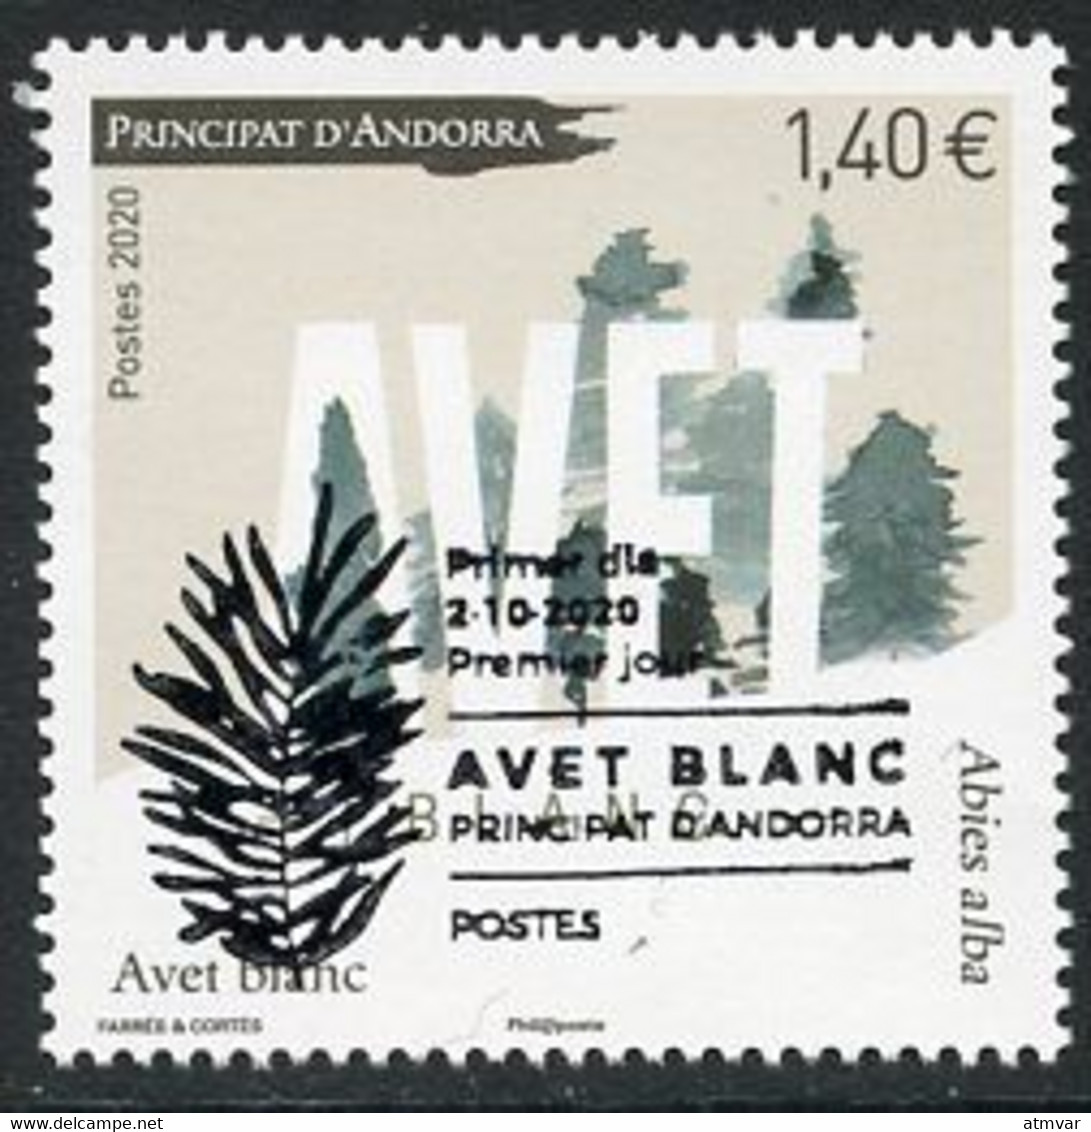 ANDORRA ANDORRE (2020) - Avet Blanc, Abies Alba, Sapin Blanc - Premier Jour, First Day Postmark, Matasello Primer Día - Used Stamps